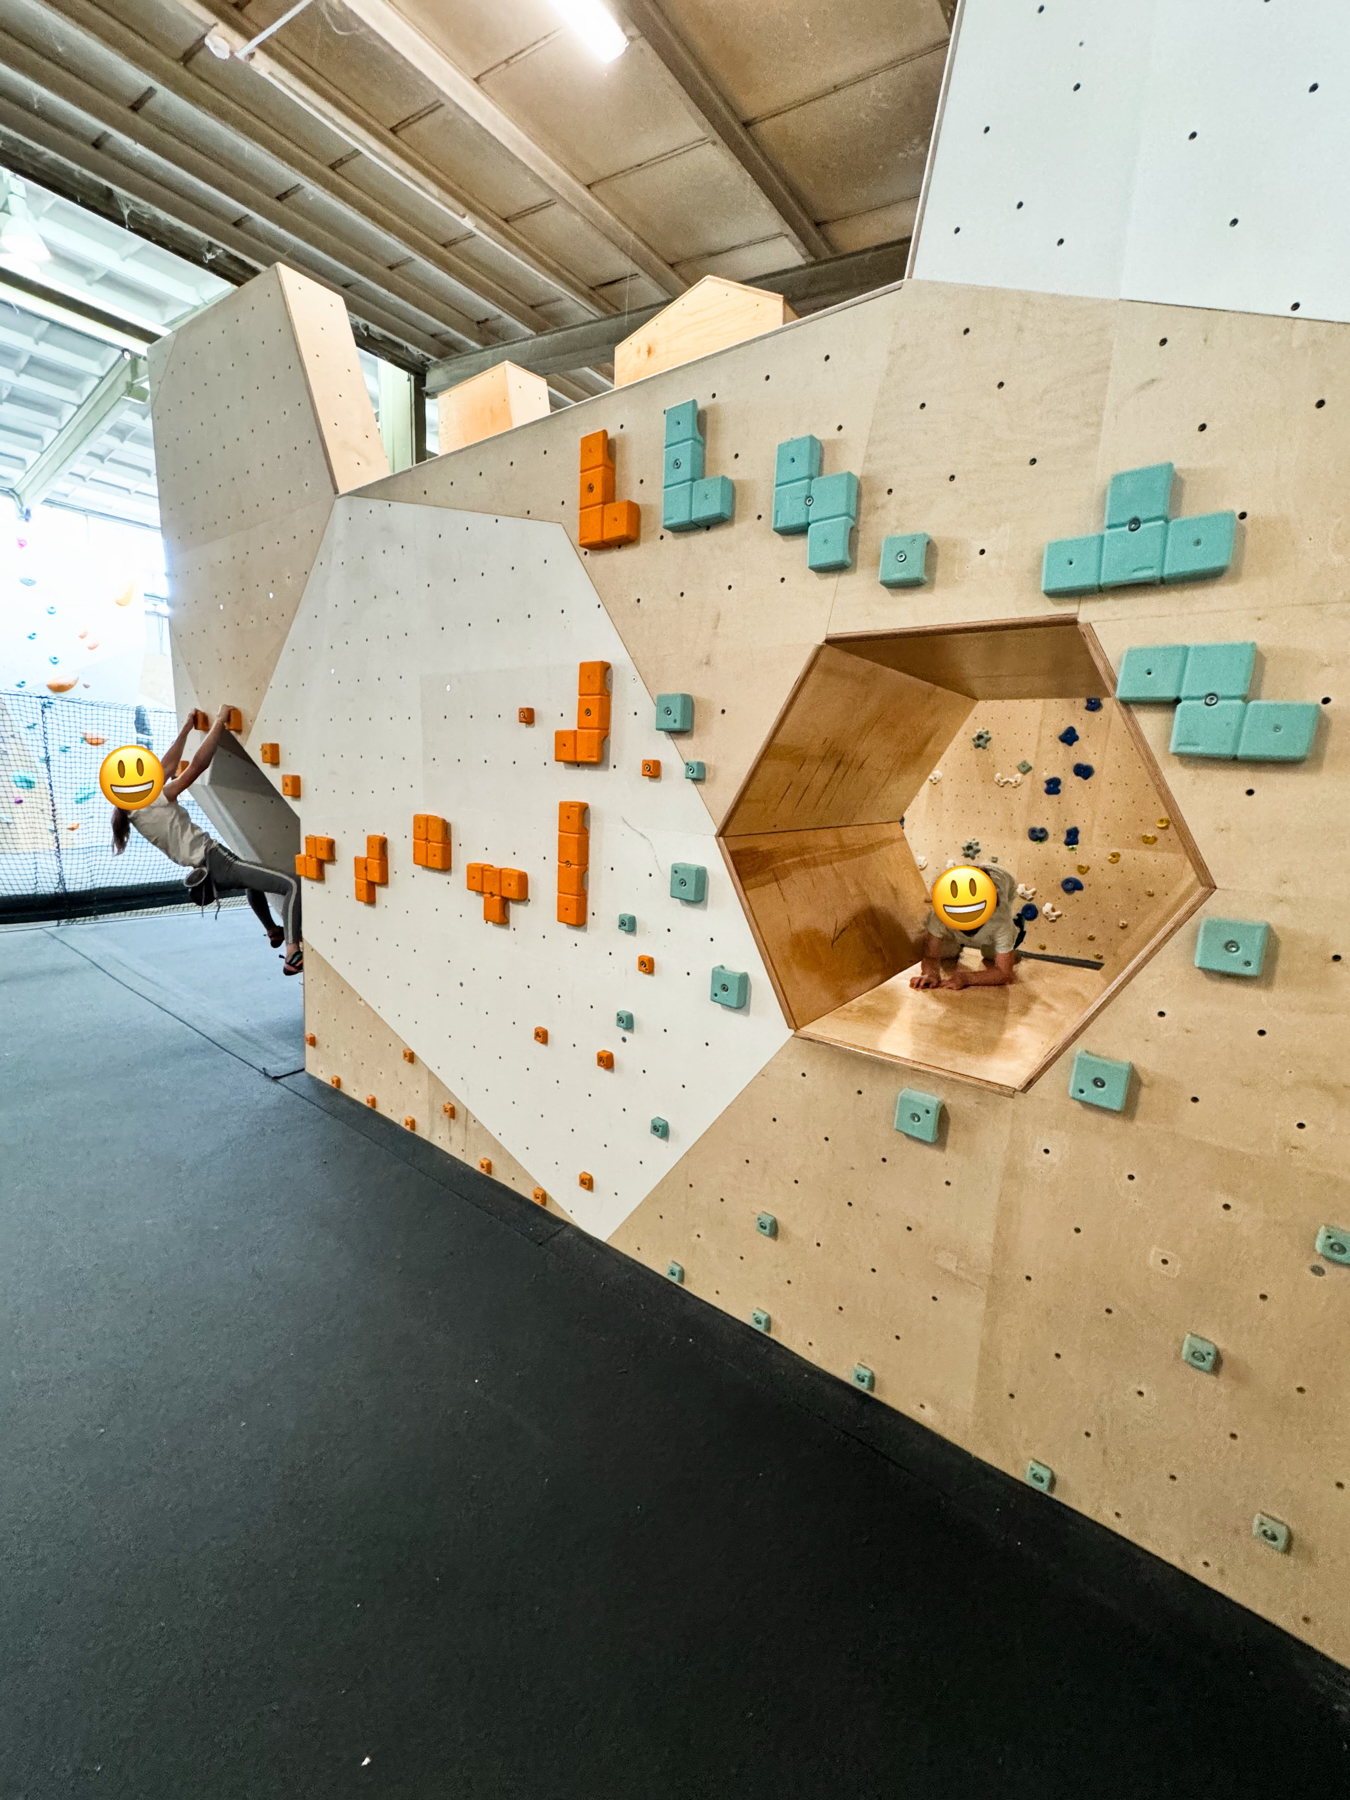 Indoor climbing gym with a wooden climbing wall featuring orange and turquoise holds. A person is climbing on the left side, and another individual is sitting inside a hexagonal cutout on the wall.